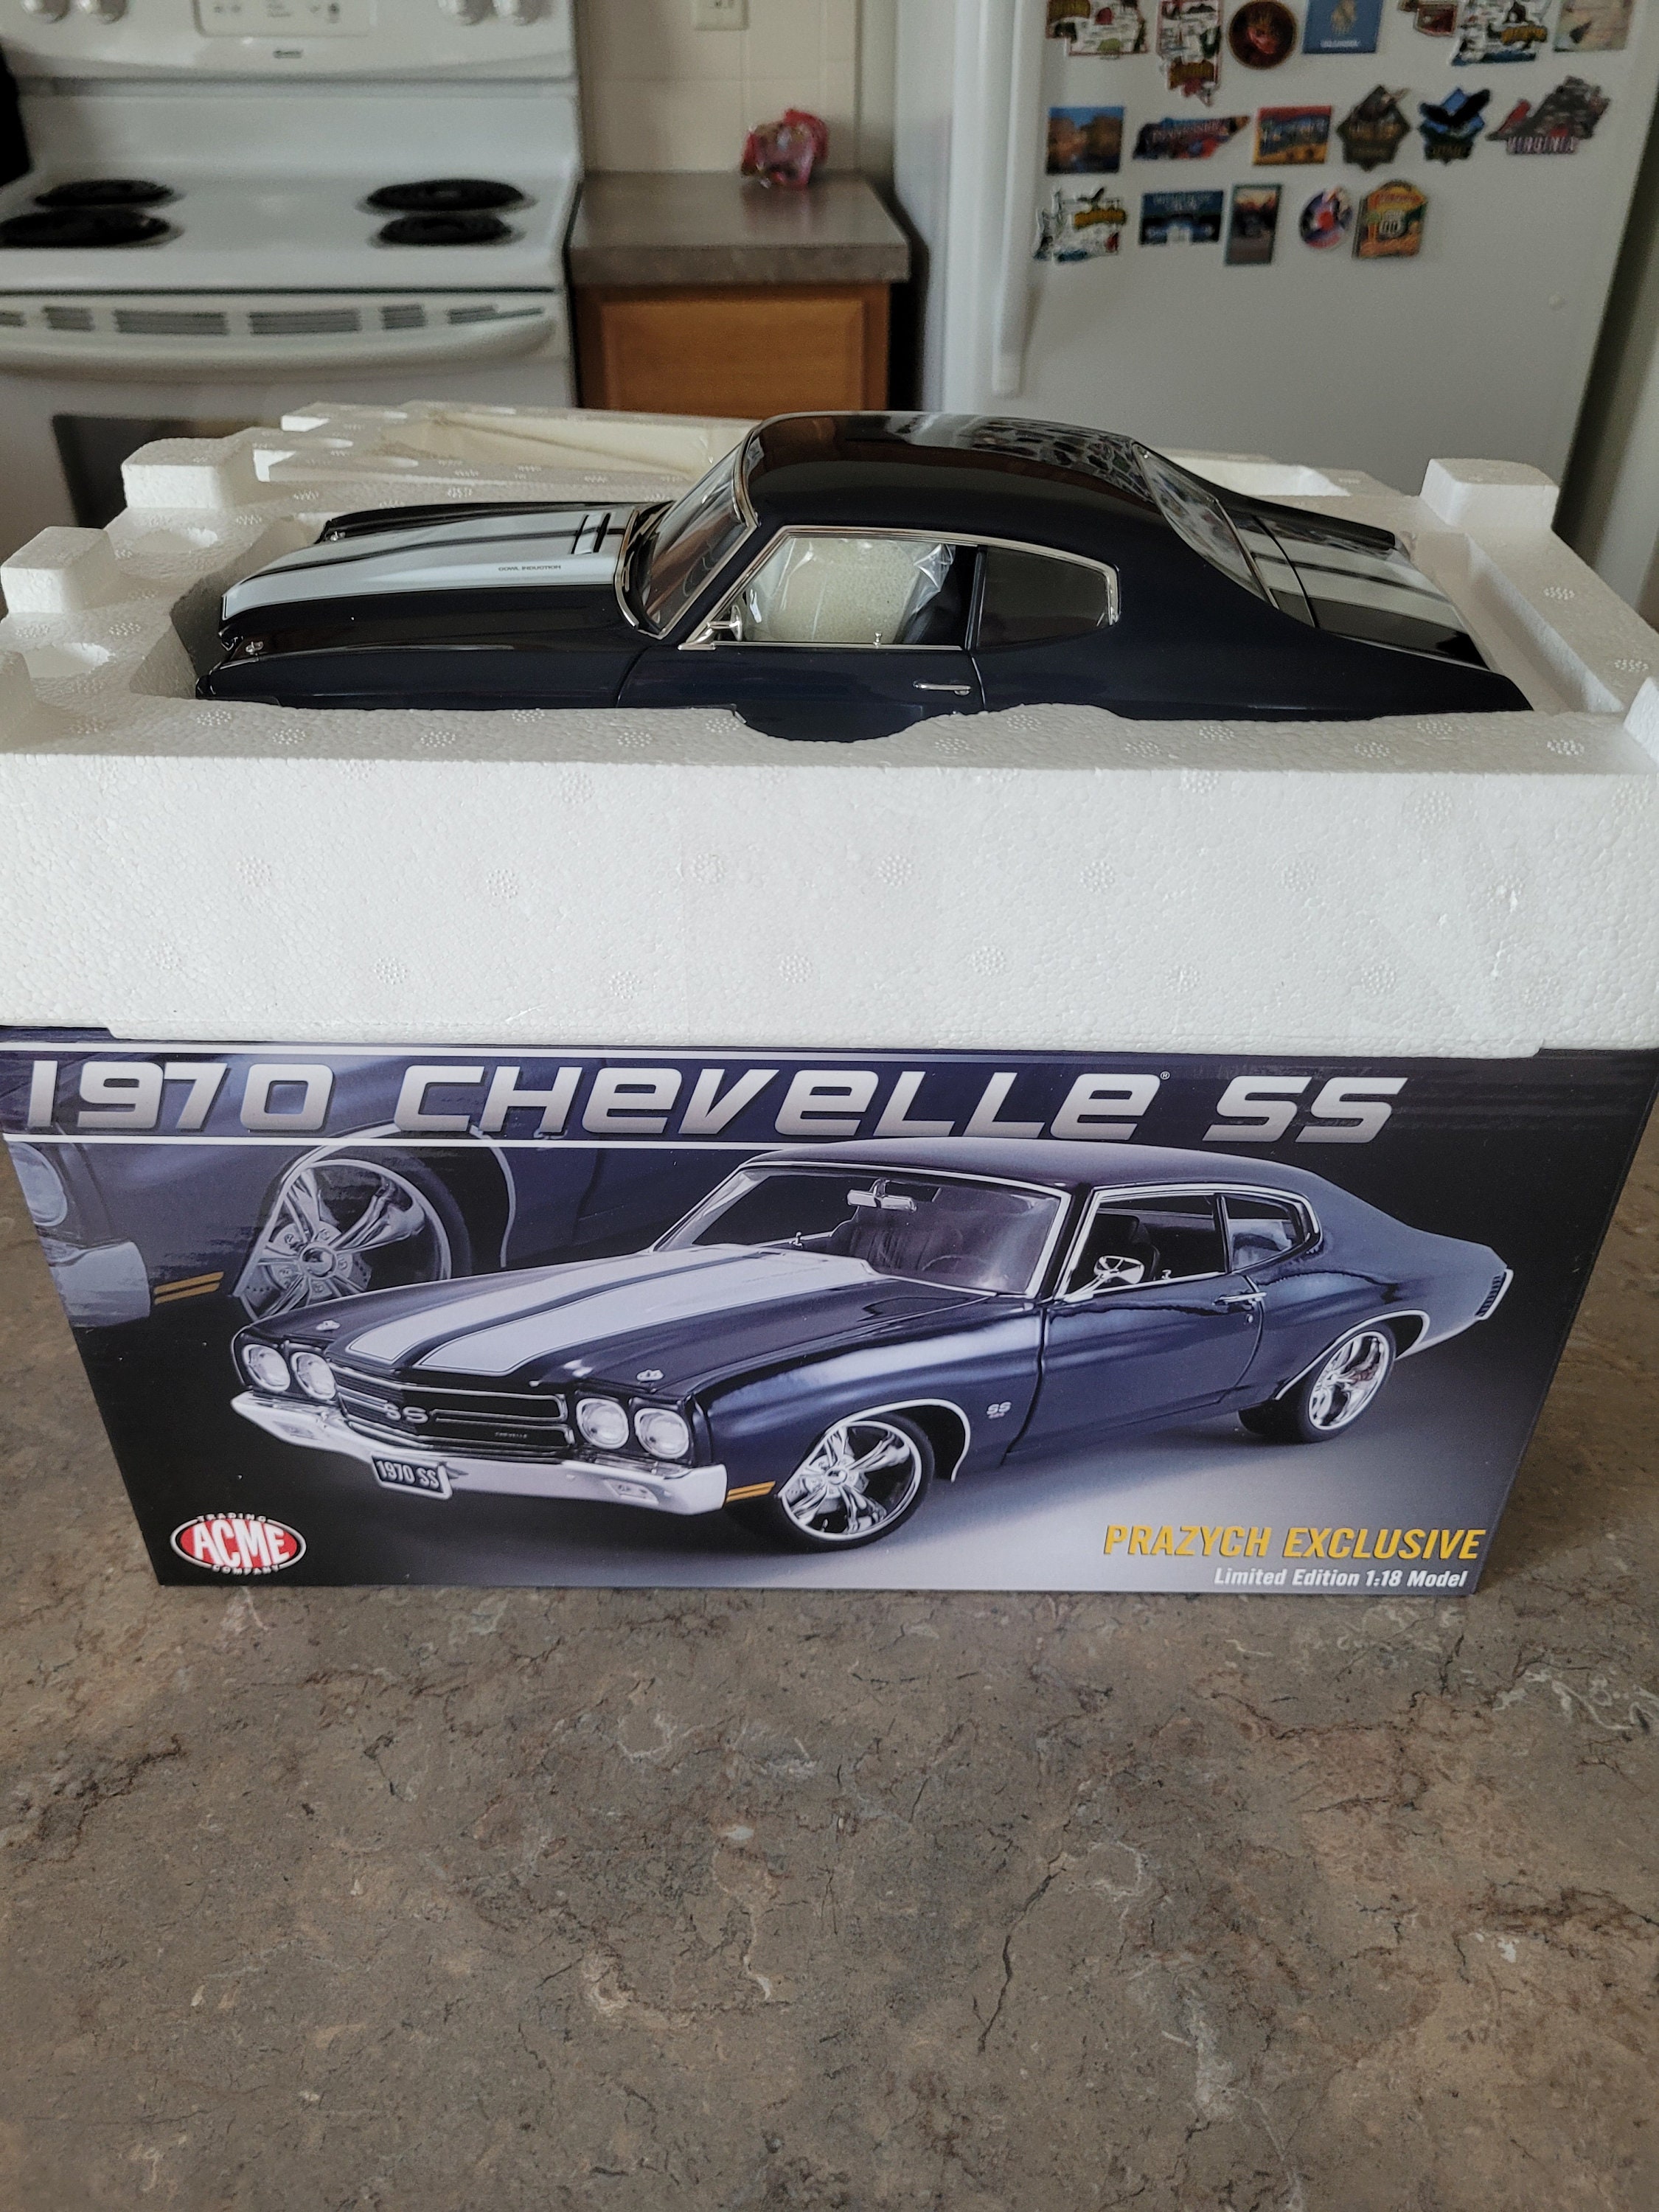 Miniature 1/24 CHEVROLET Chevelle SS Fast And Furious I RS Autom